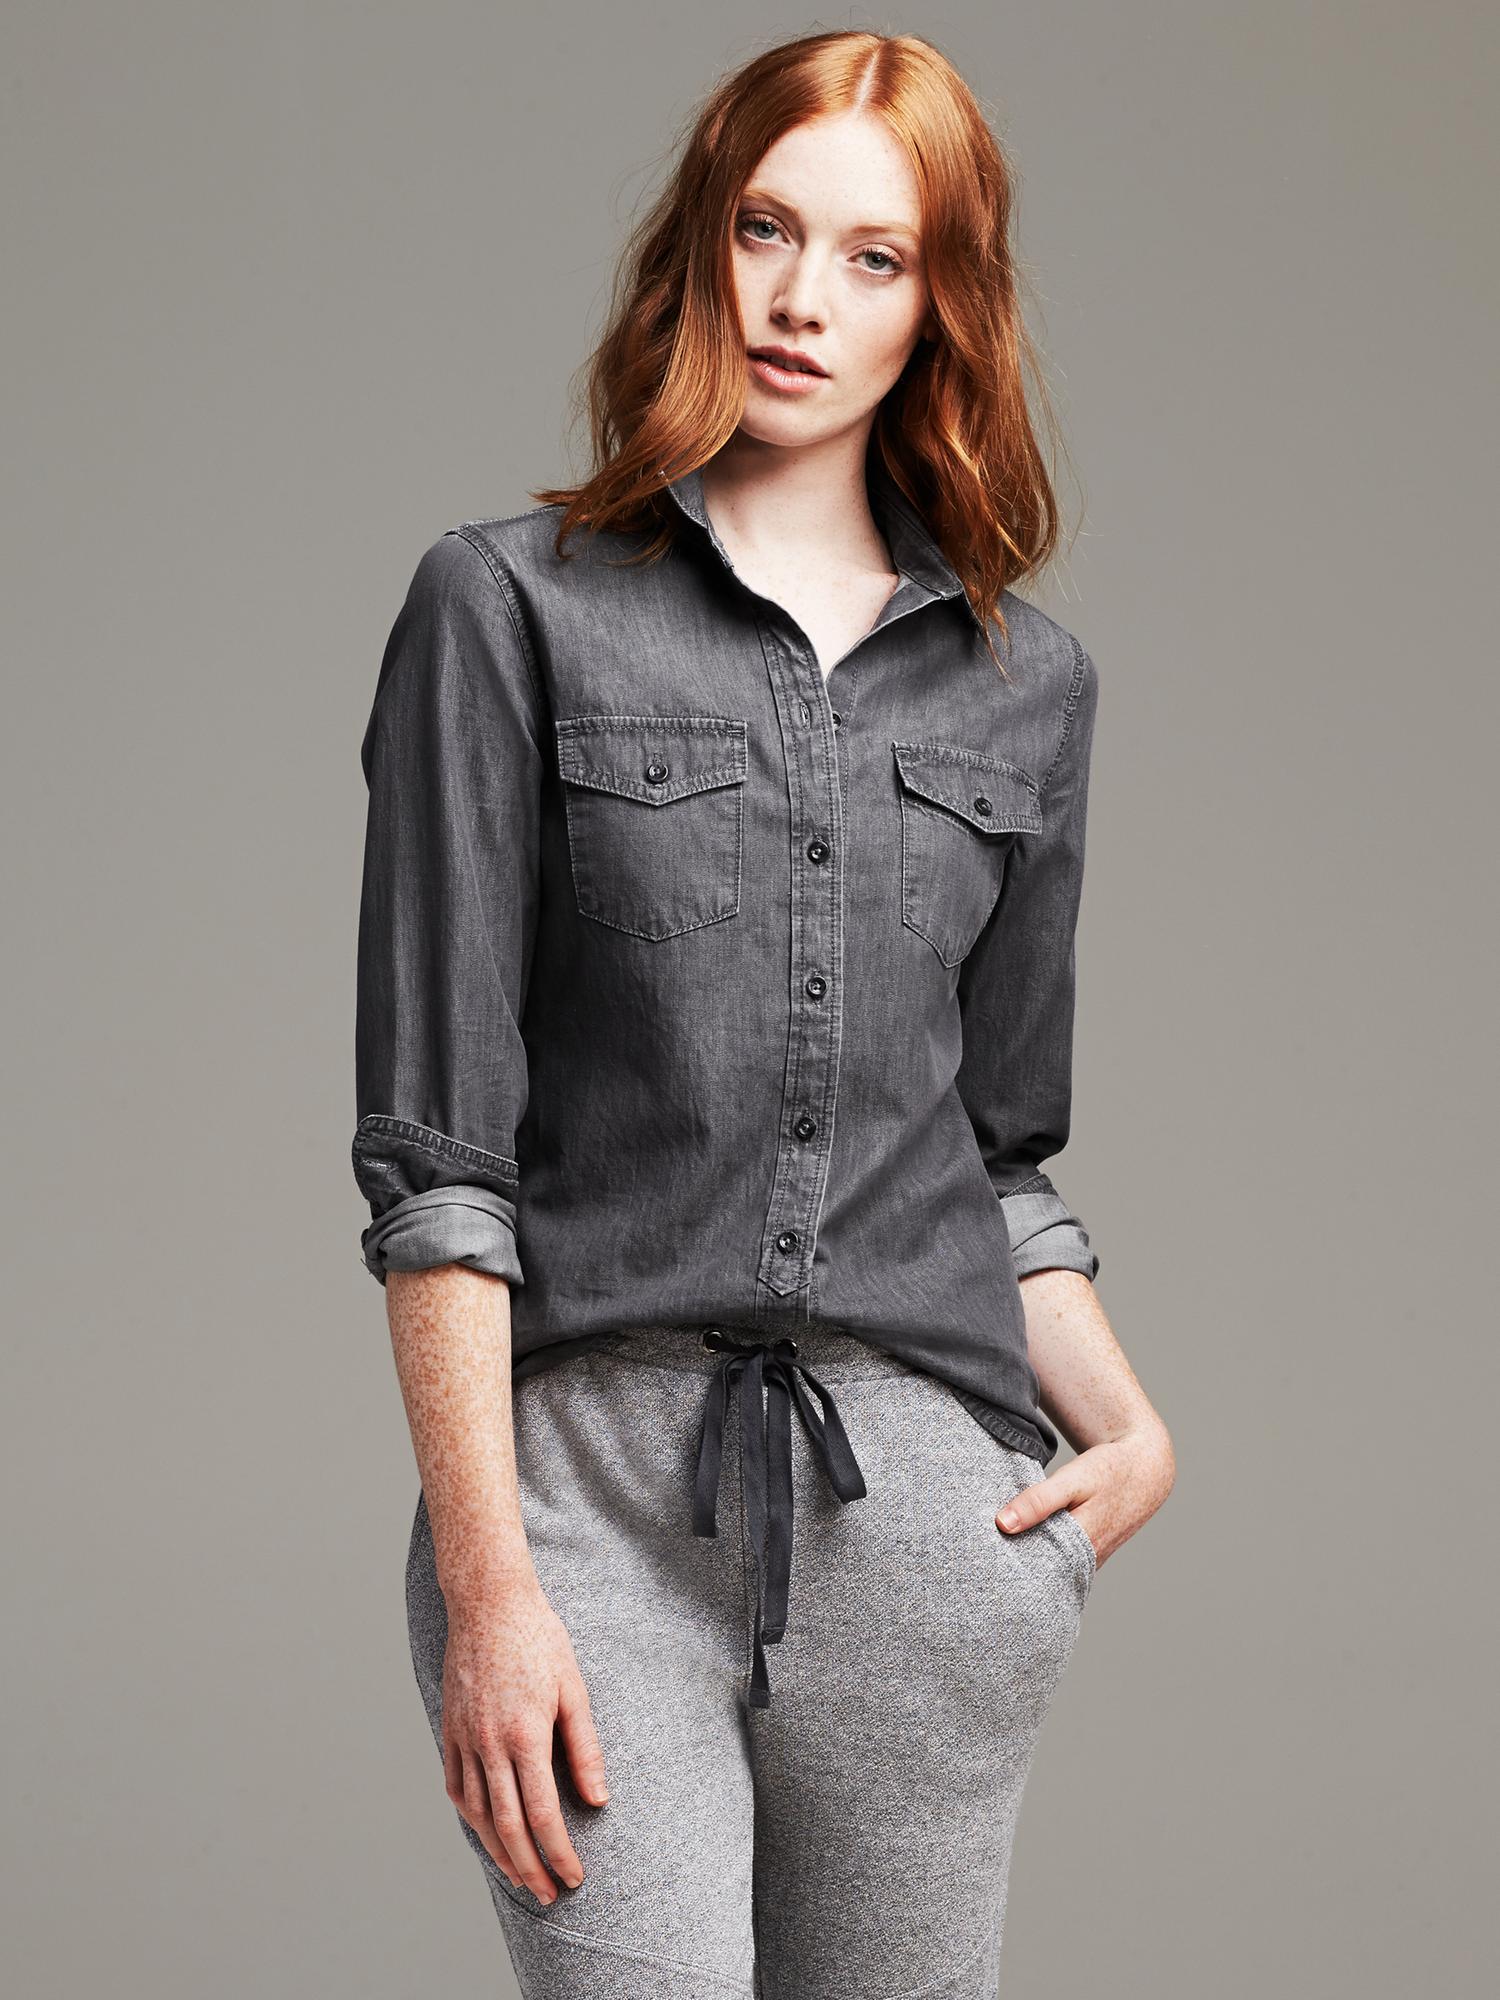 The Chambray and Denim Shirts Should Be on Your Wishlist in Fall